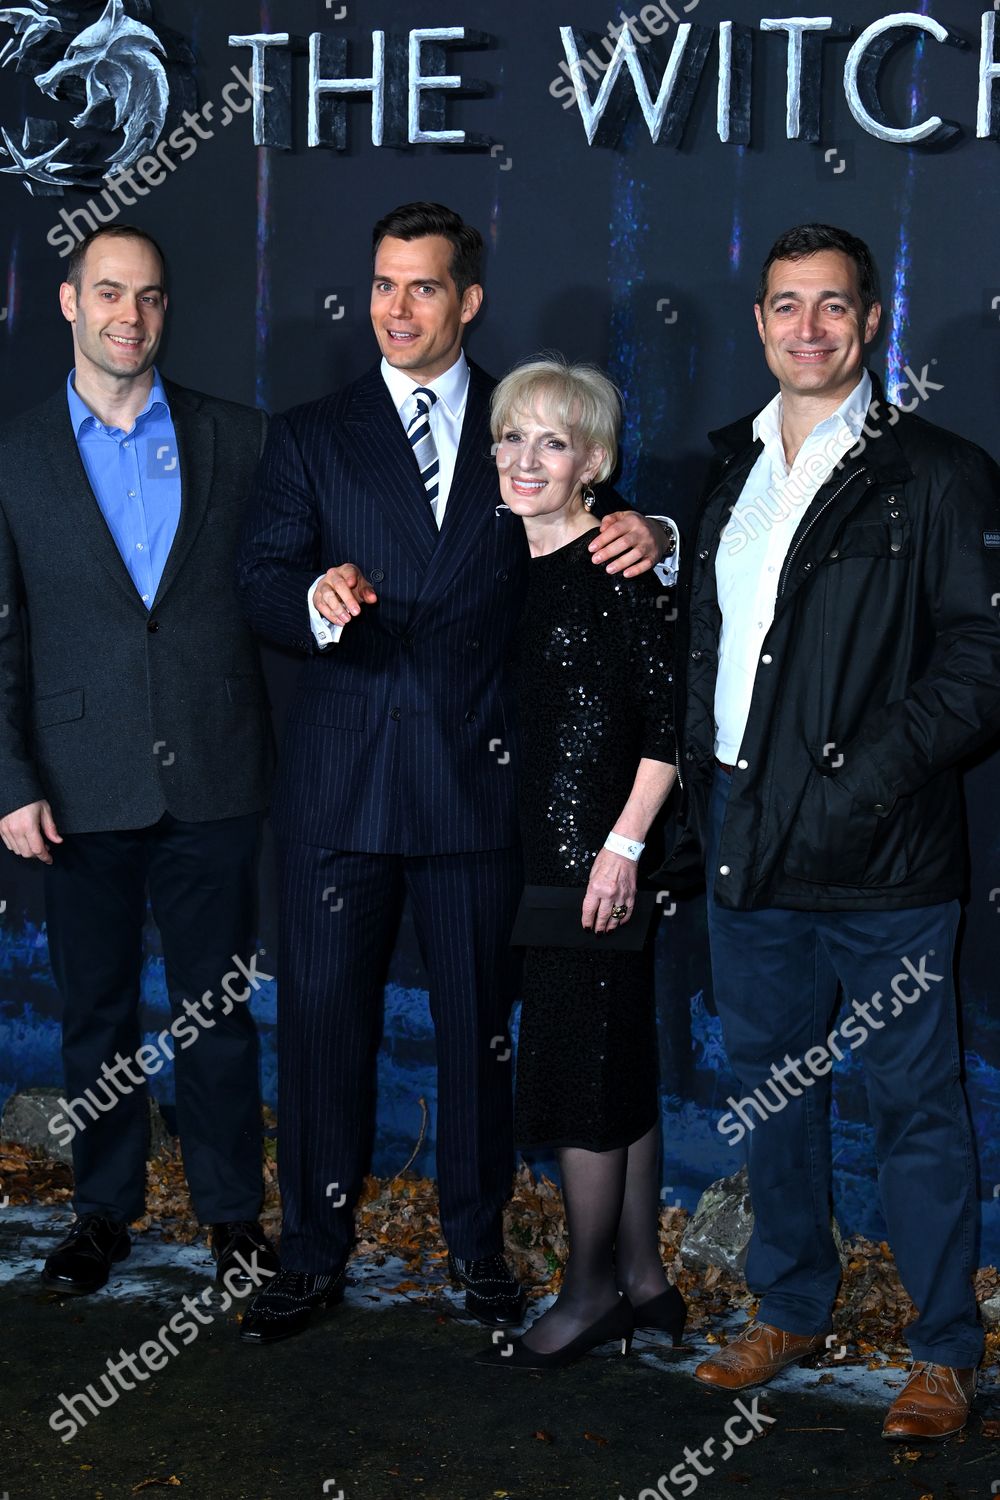 Henry Cavill — HENRY CAVILL, with his mother and brothers SIMON